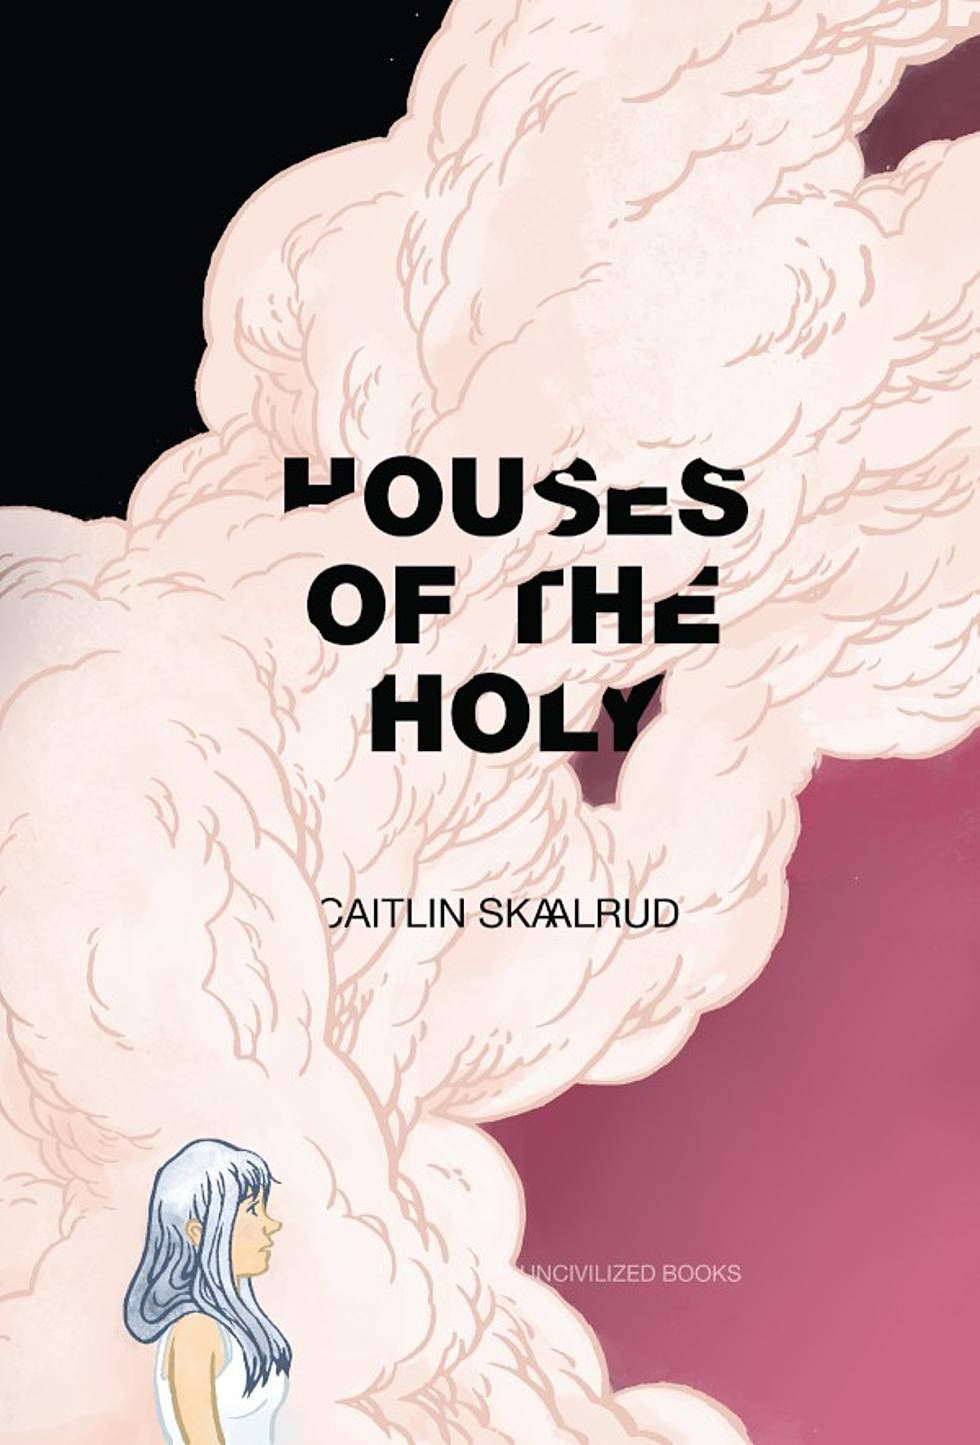 Damaged Beauty: Why You Should Visit Caitlin Skaalrud&#8217;s &#8216;Houses Of The Holy&#8217;